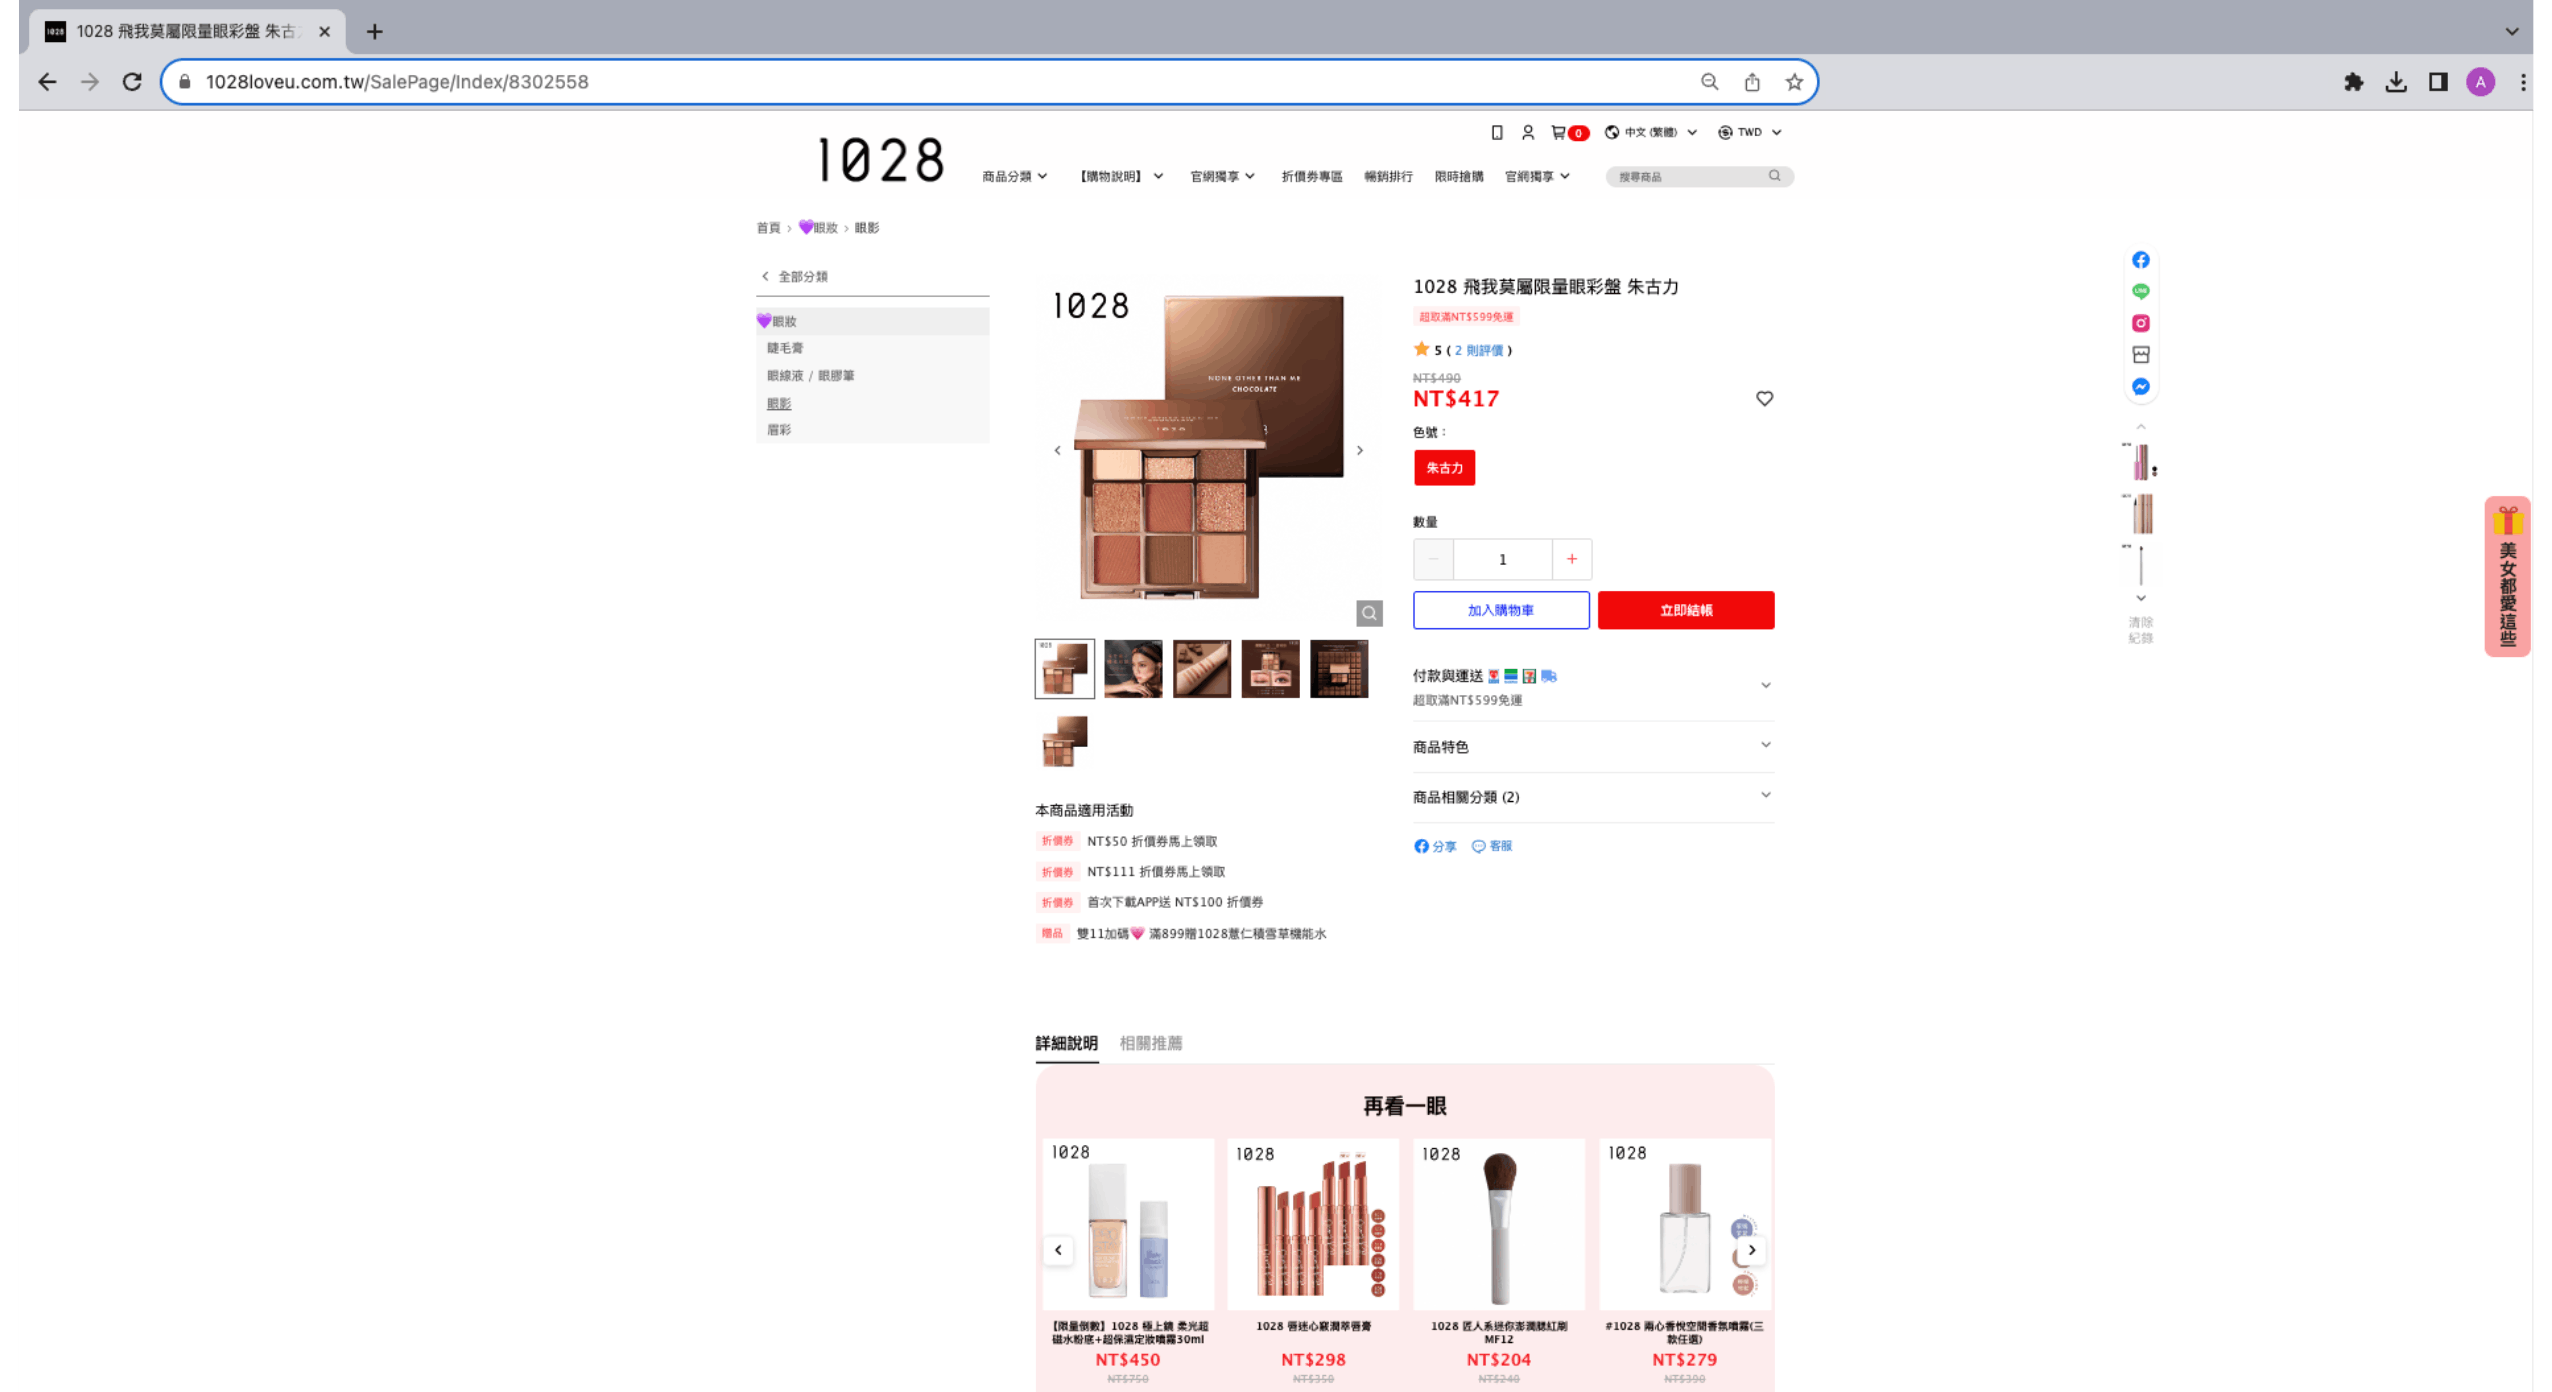 1028 - product page